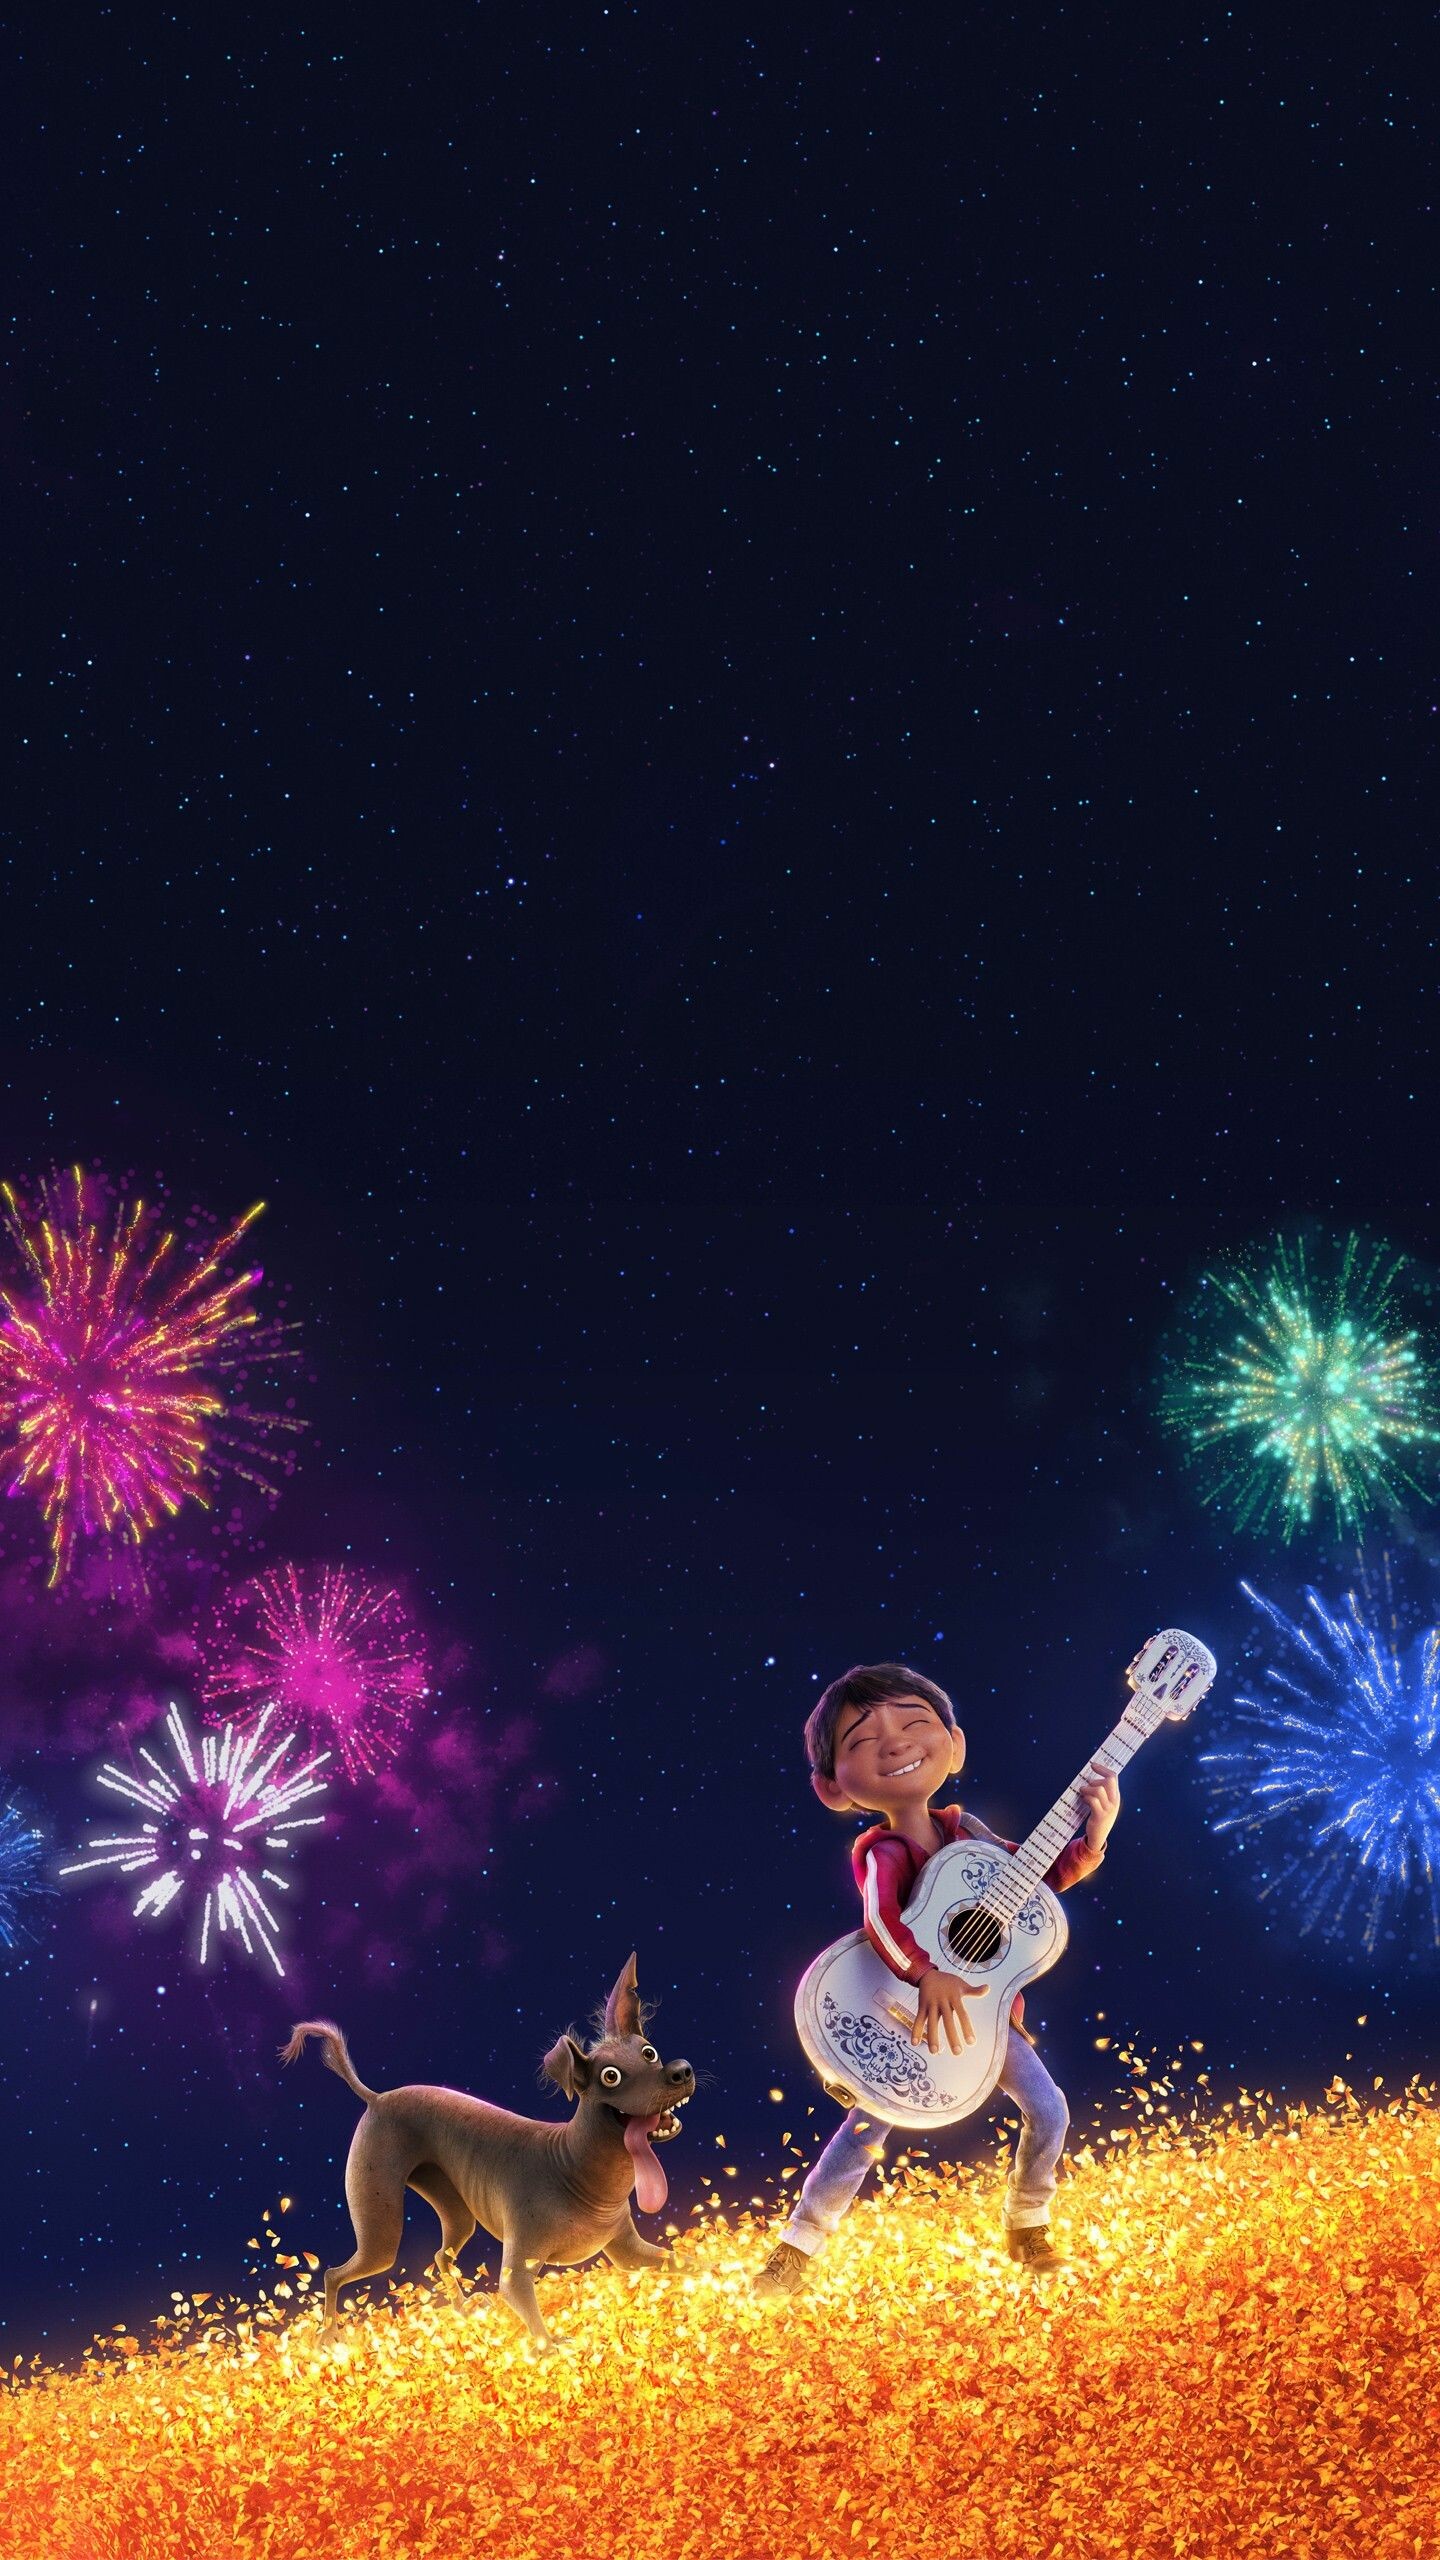 Coco (Cartoon): It's become the number one movie of all time in Mexico, with critics and audiences alike praising it for its sensitive and artful representation of the Mexican holiday and culture. 1440x2560 HD Wallpaper.